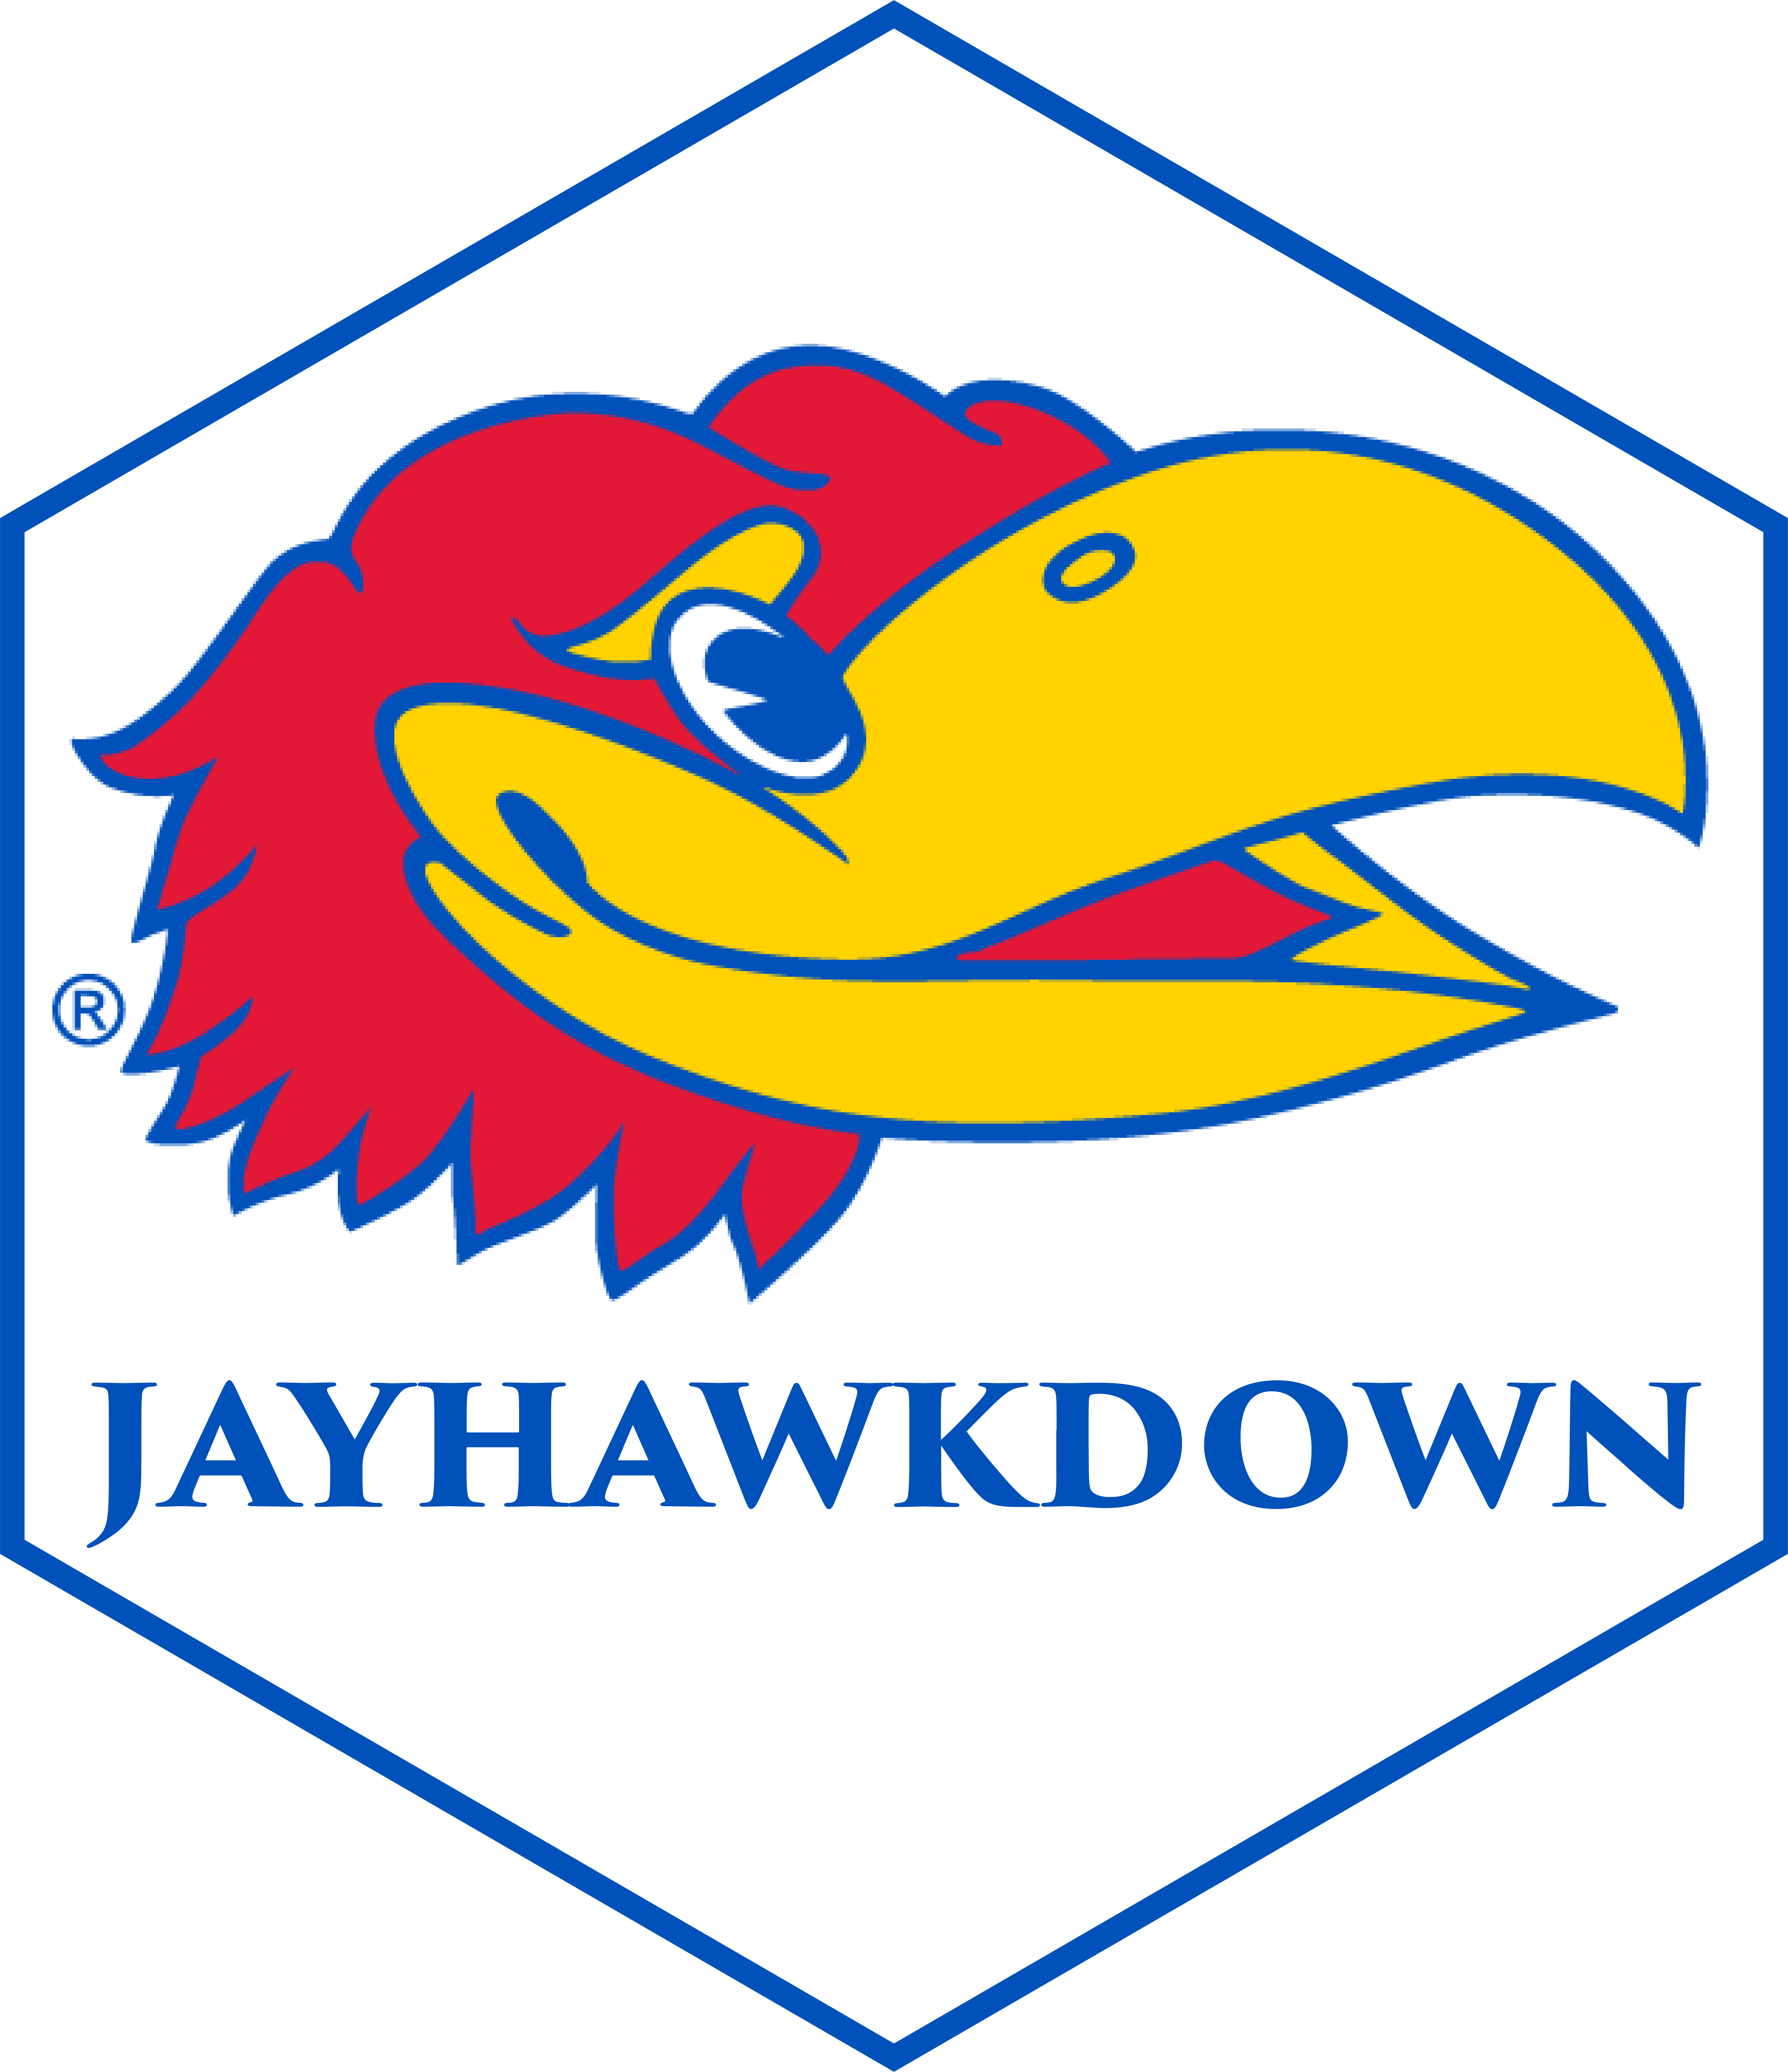 Hex logo for the jayhawkdown package.